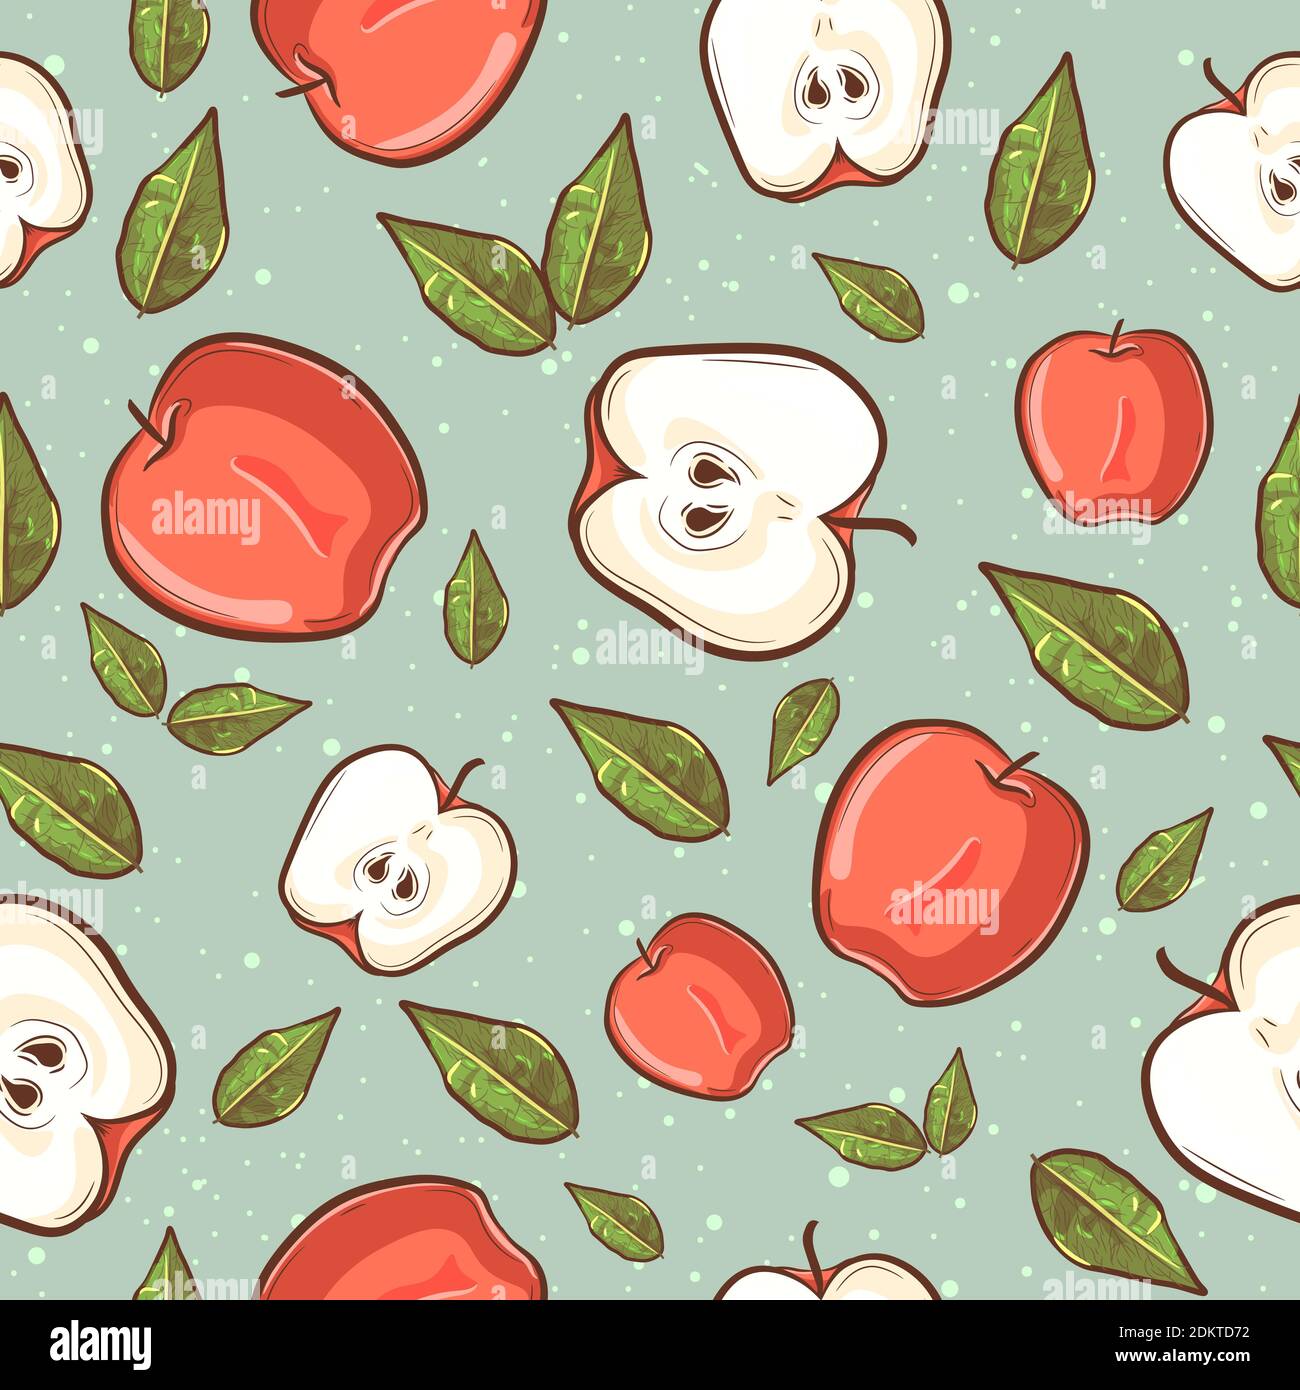 Summer tropical seamless pattern with red apples and green leaves. Repetitive background with fruits. Stock Vector